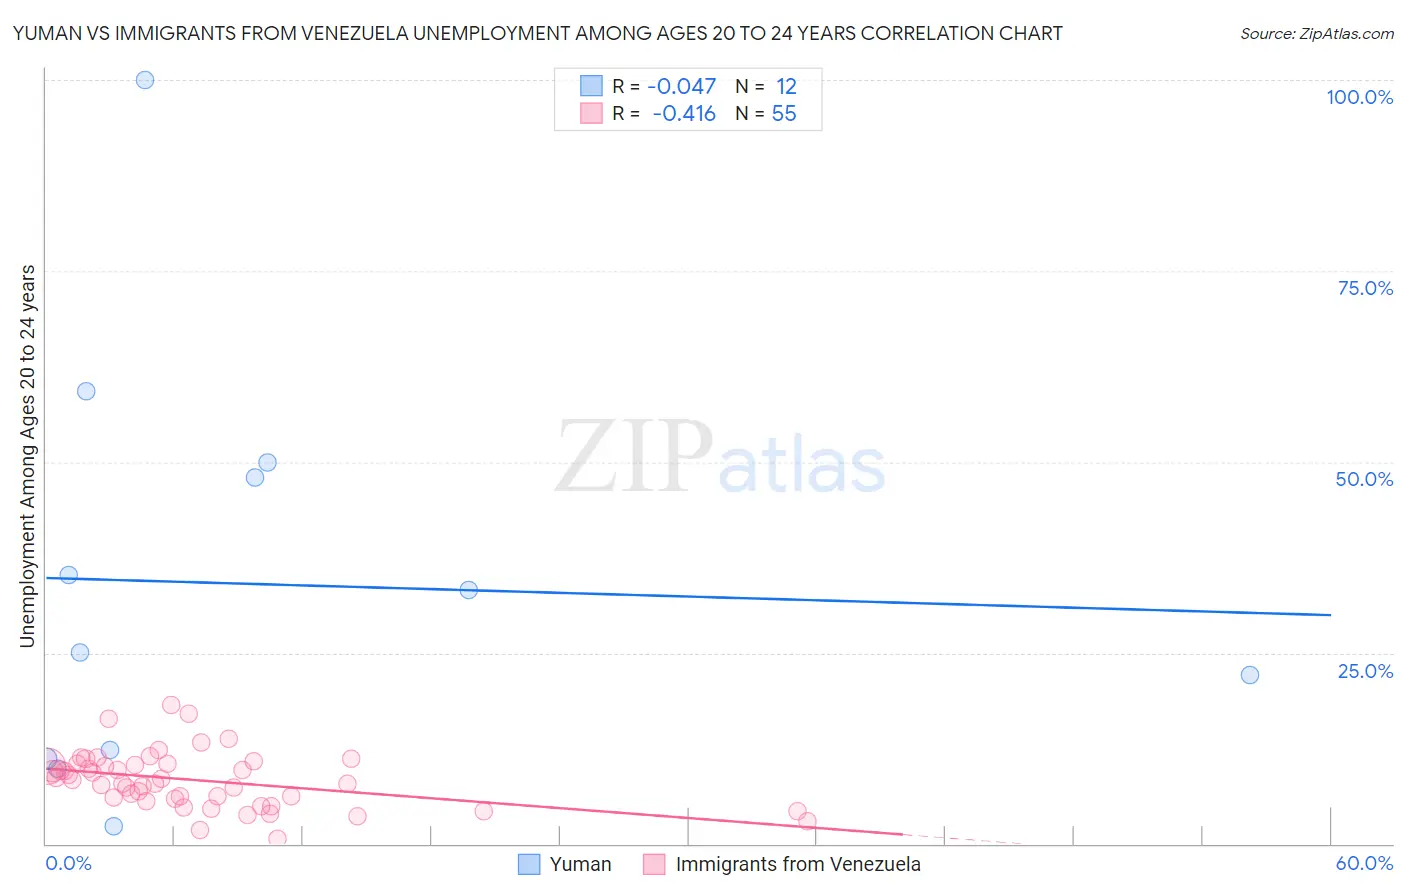 Yuman vs Immigrants from Venezuela Unemployment Among Ages 20 to 24 years